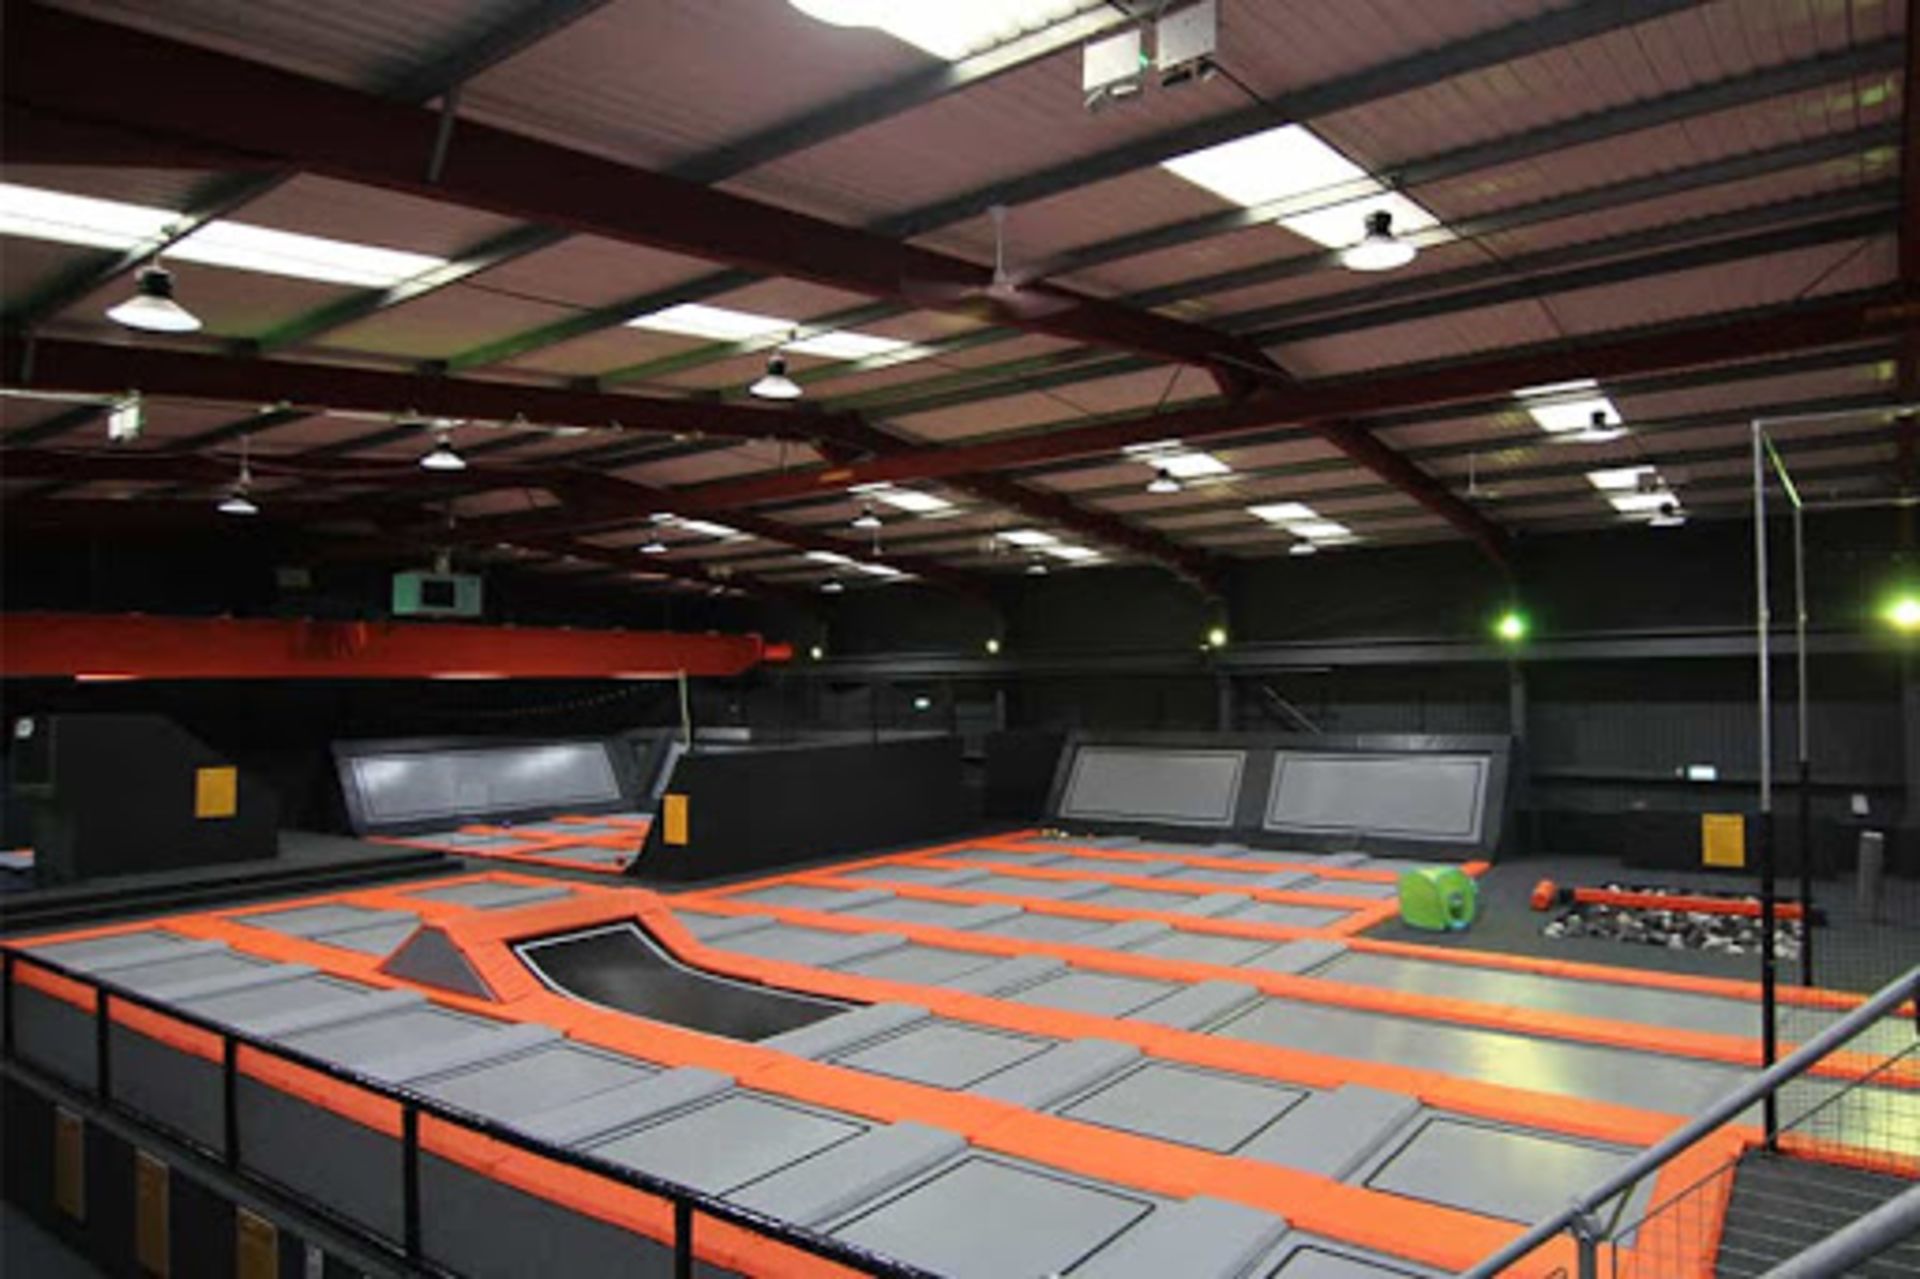 1 x Large Trampoline Park - Disassembled - Includes Dodgeball Arena And Jump Tower - CL766  - - Image 11 of 99